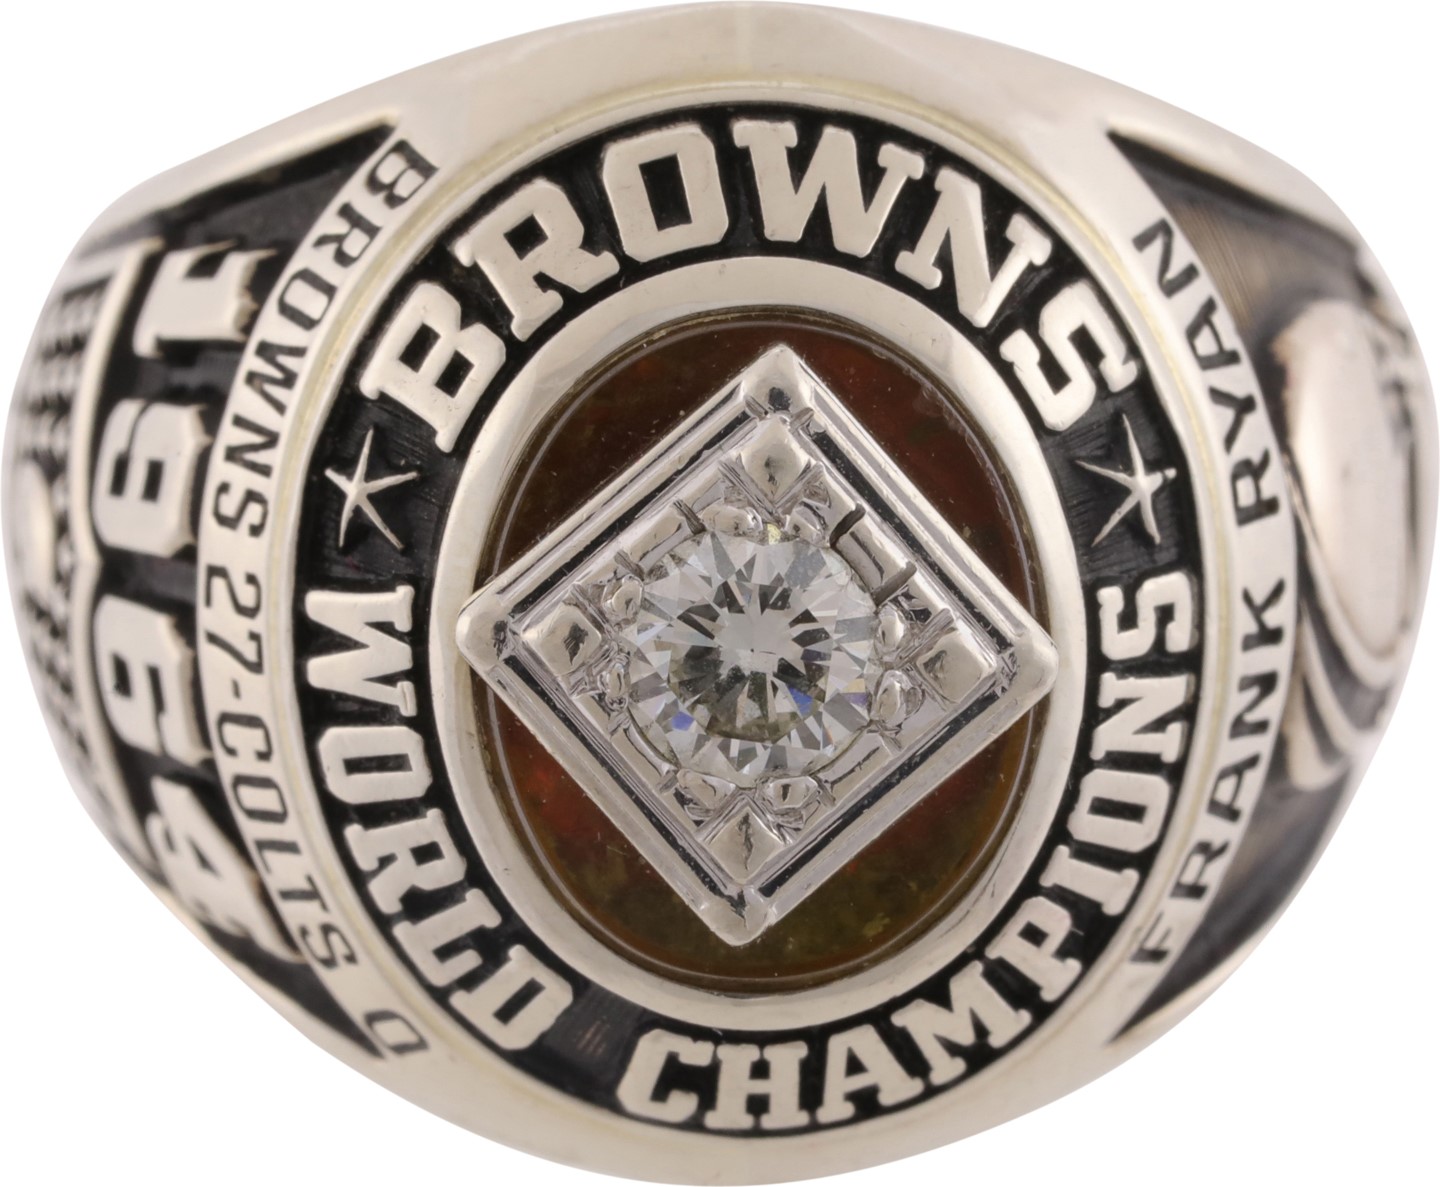 - 1964 Cleveland Browns NFL Championship Ring Presented to Quarterback Frank Ryan